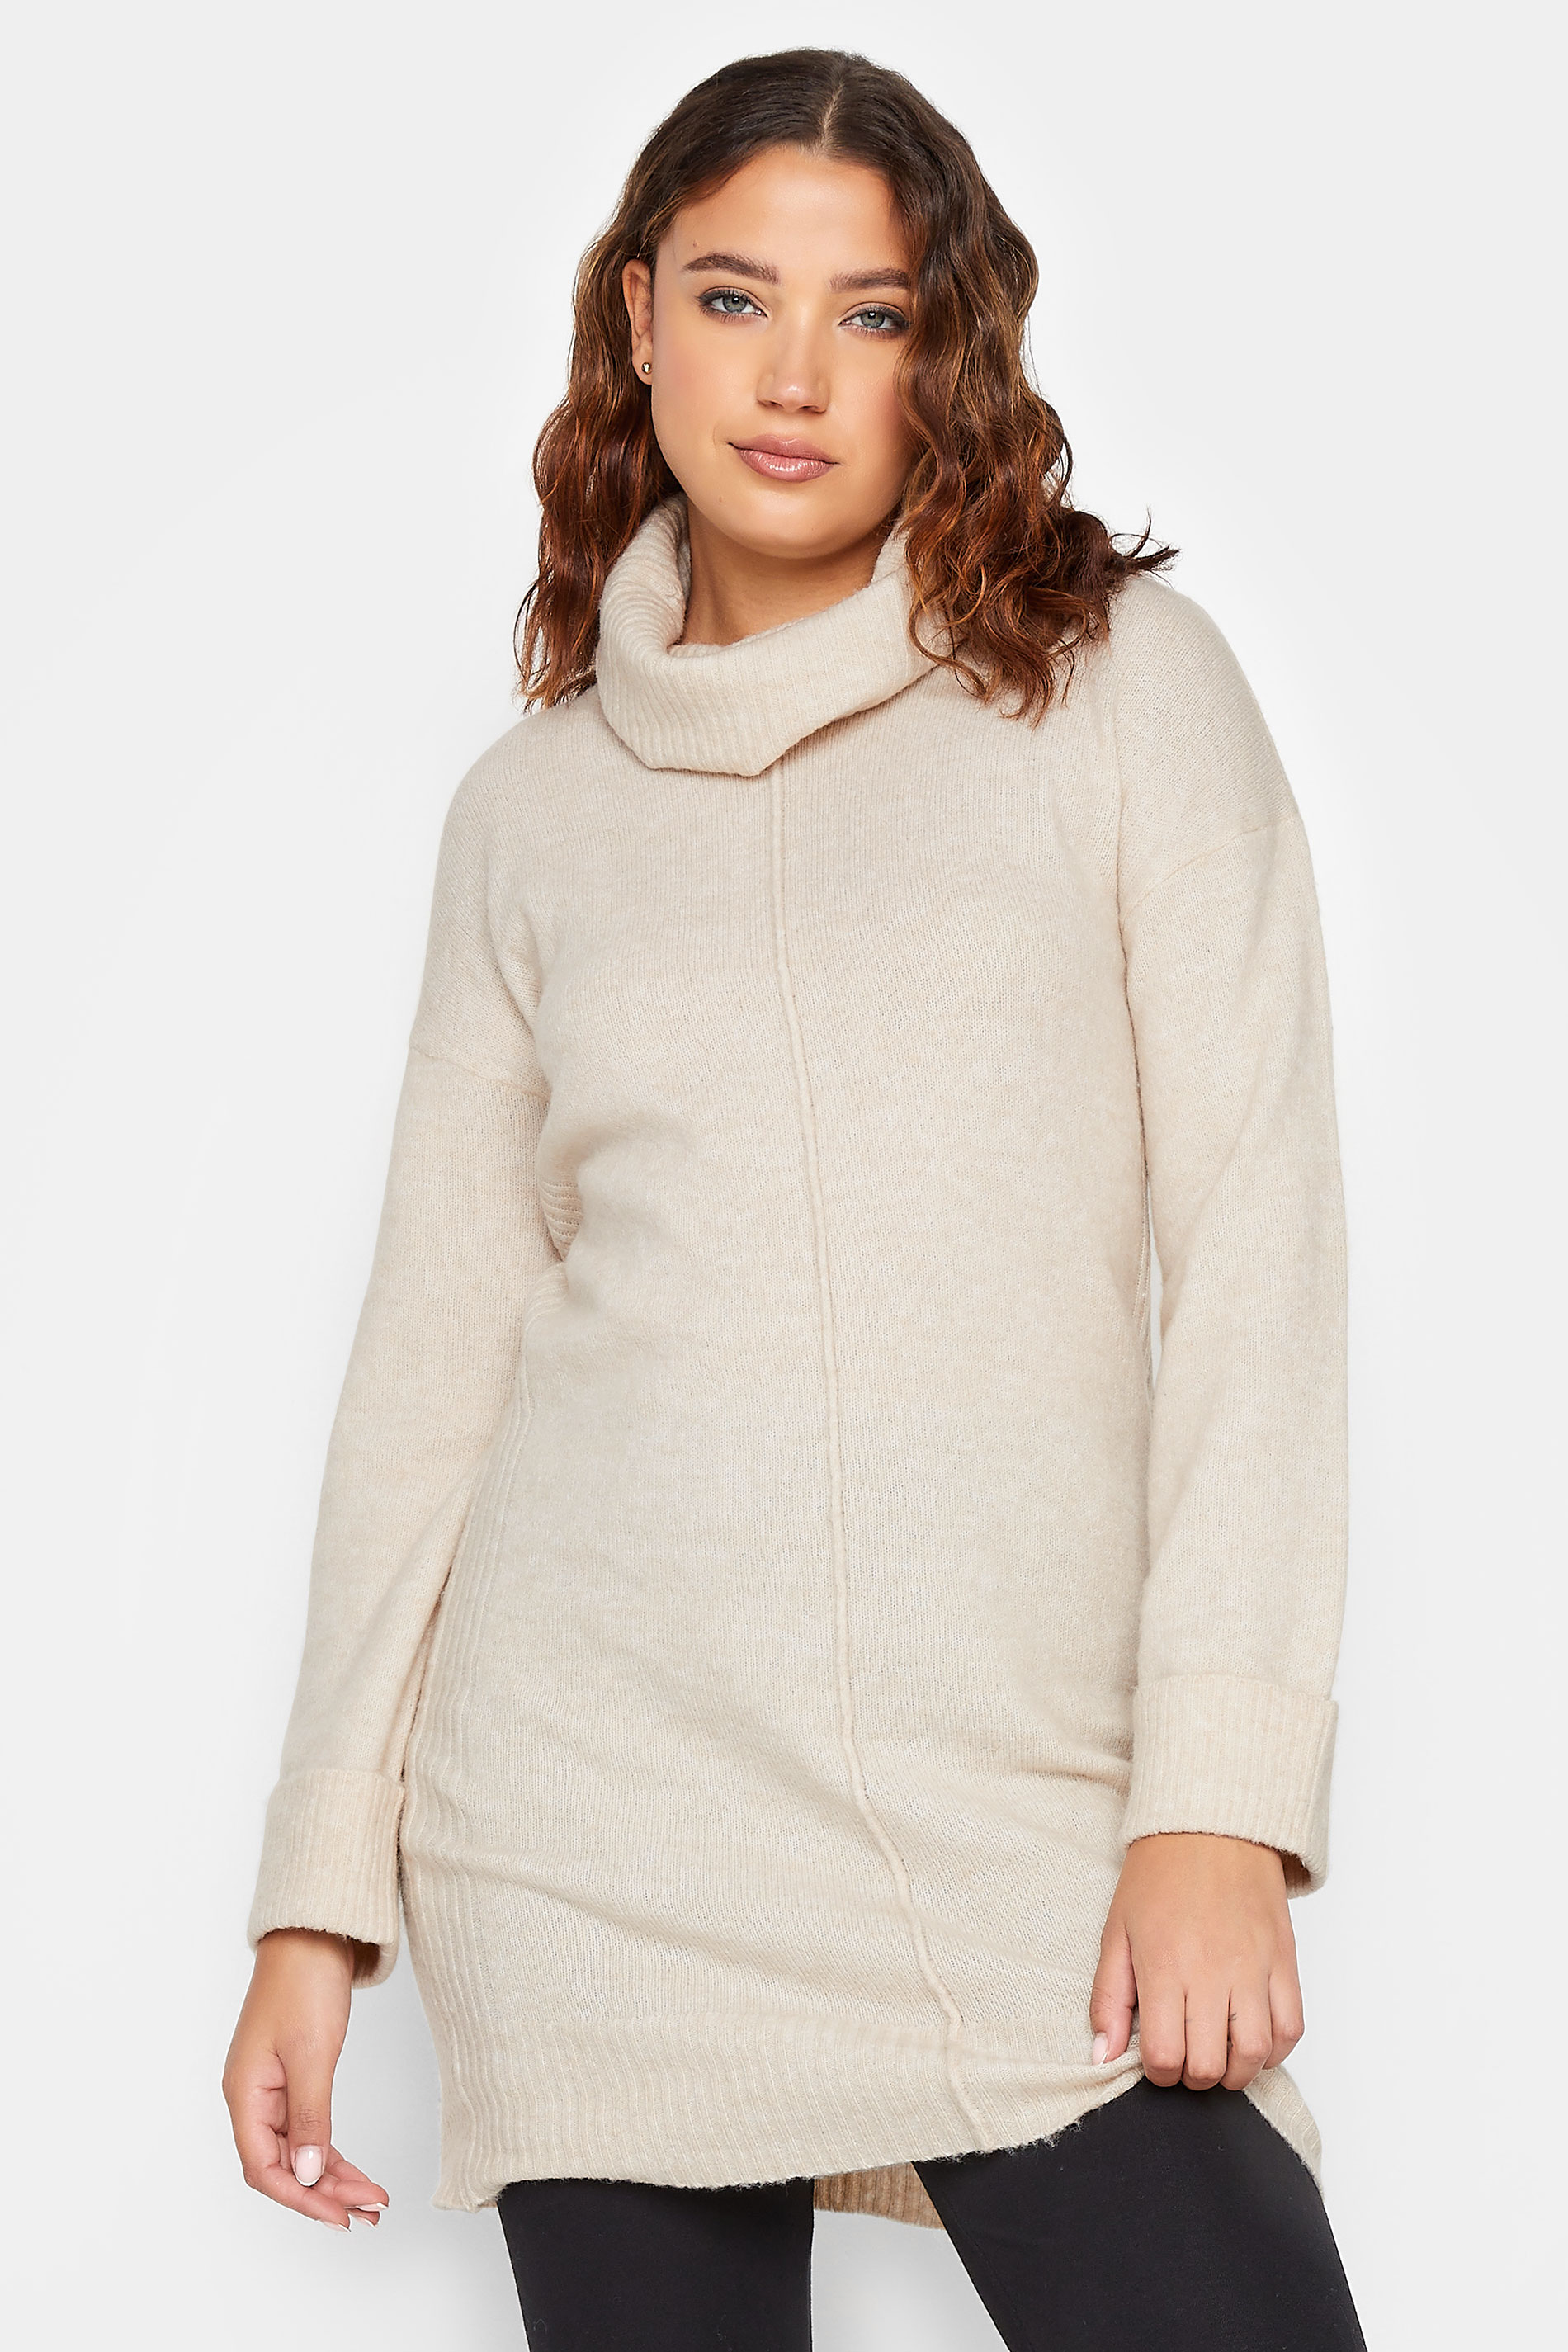 LTS Tall Ivory White Boxy Roll Neck Jumper | Long Tall Sally 1